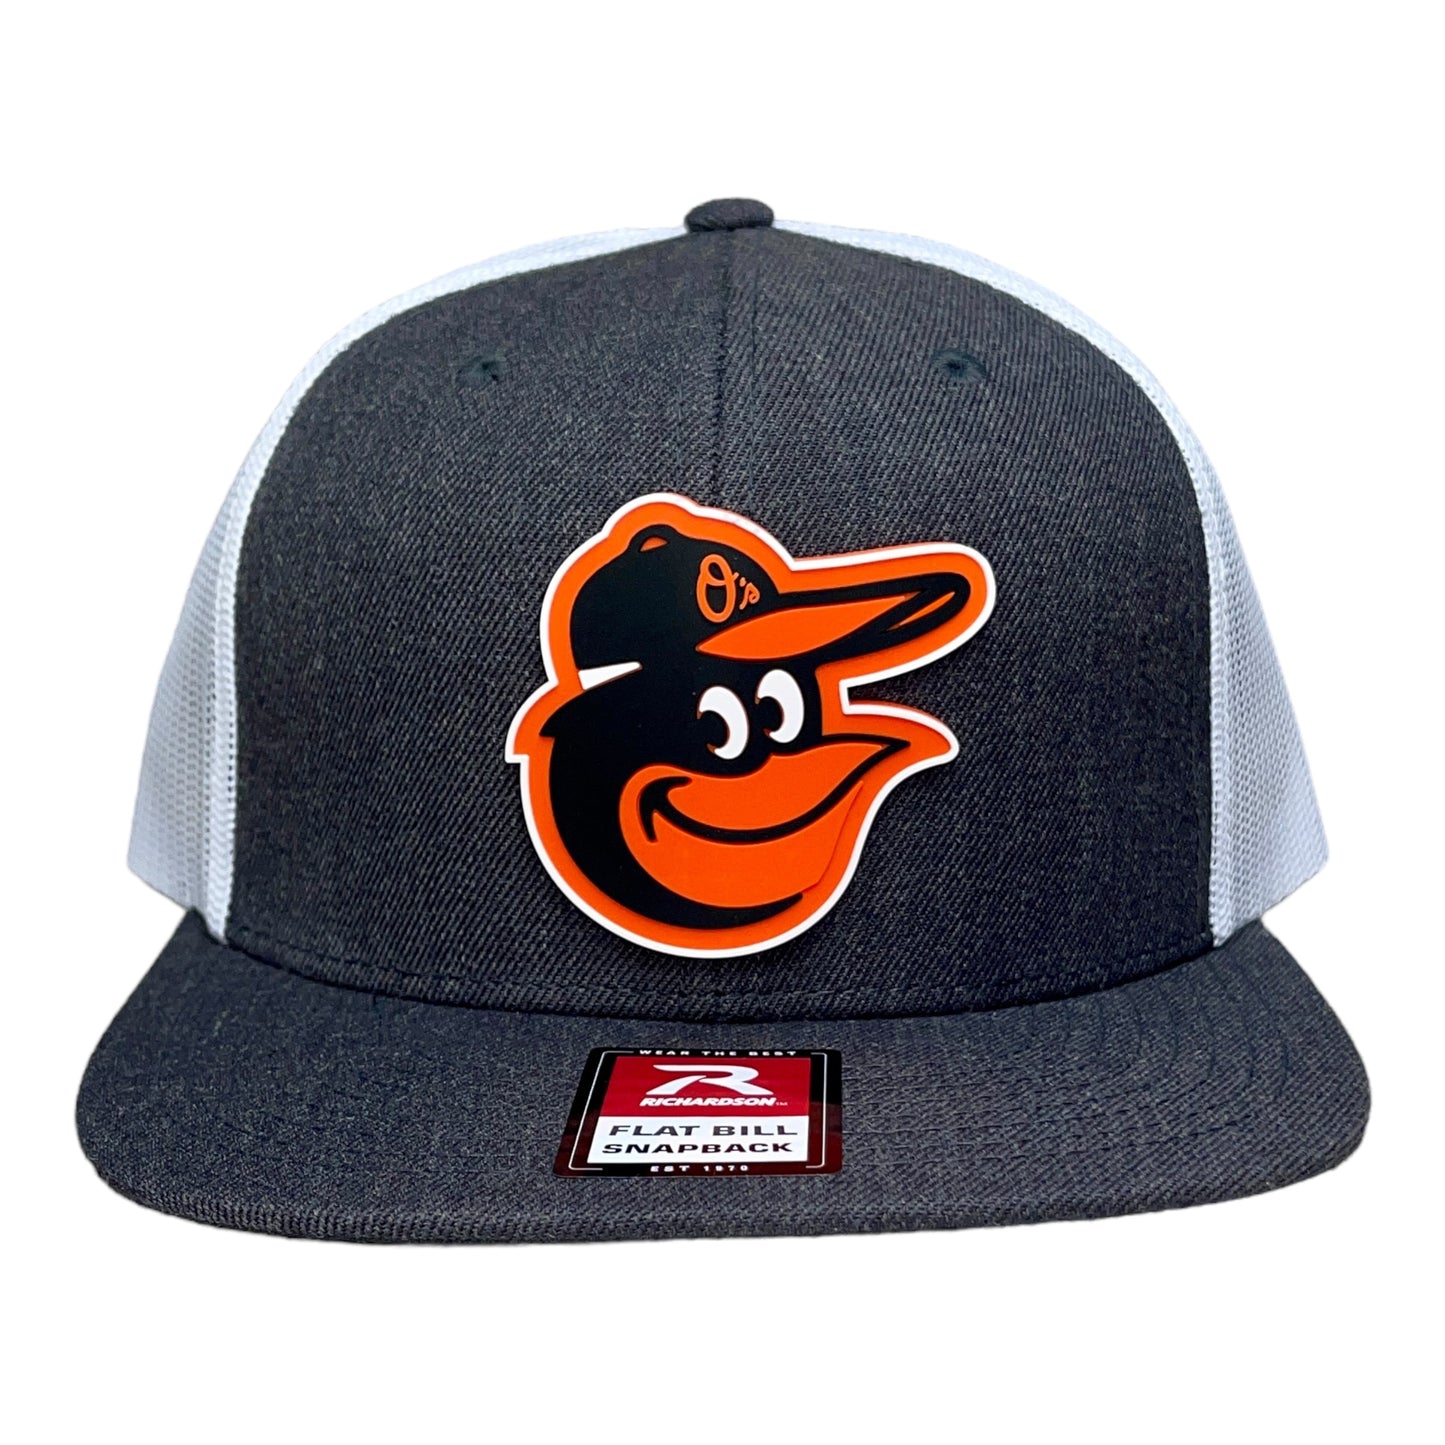 Baltimore Orioles 3D Snapback Wool Blend Flat Bill Hat- Heather Charcoal/ White